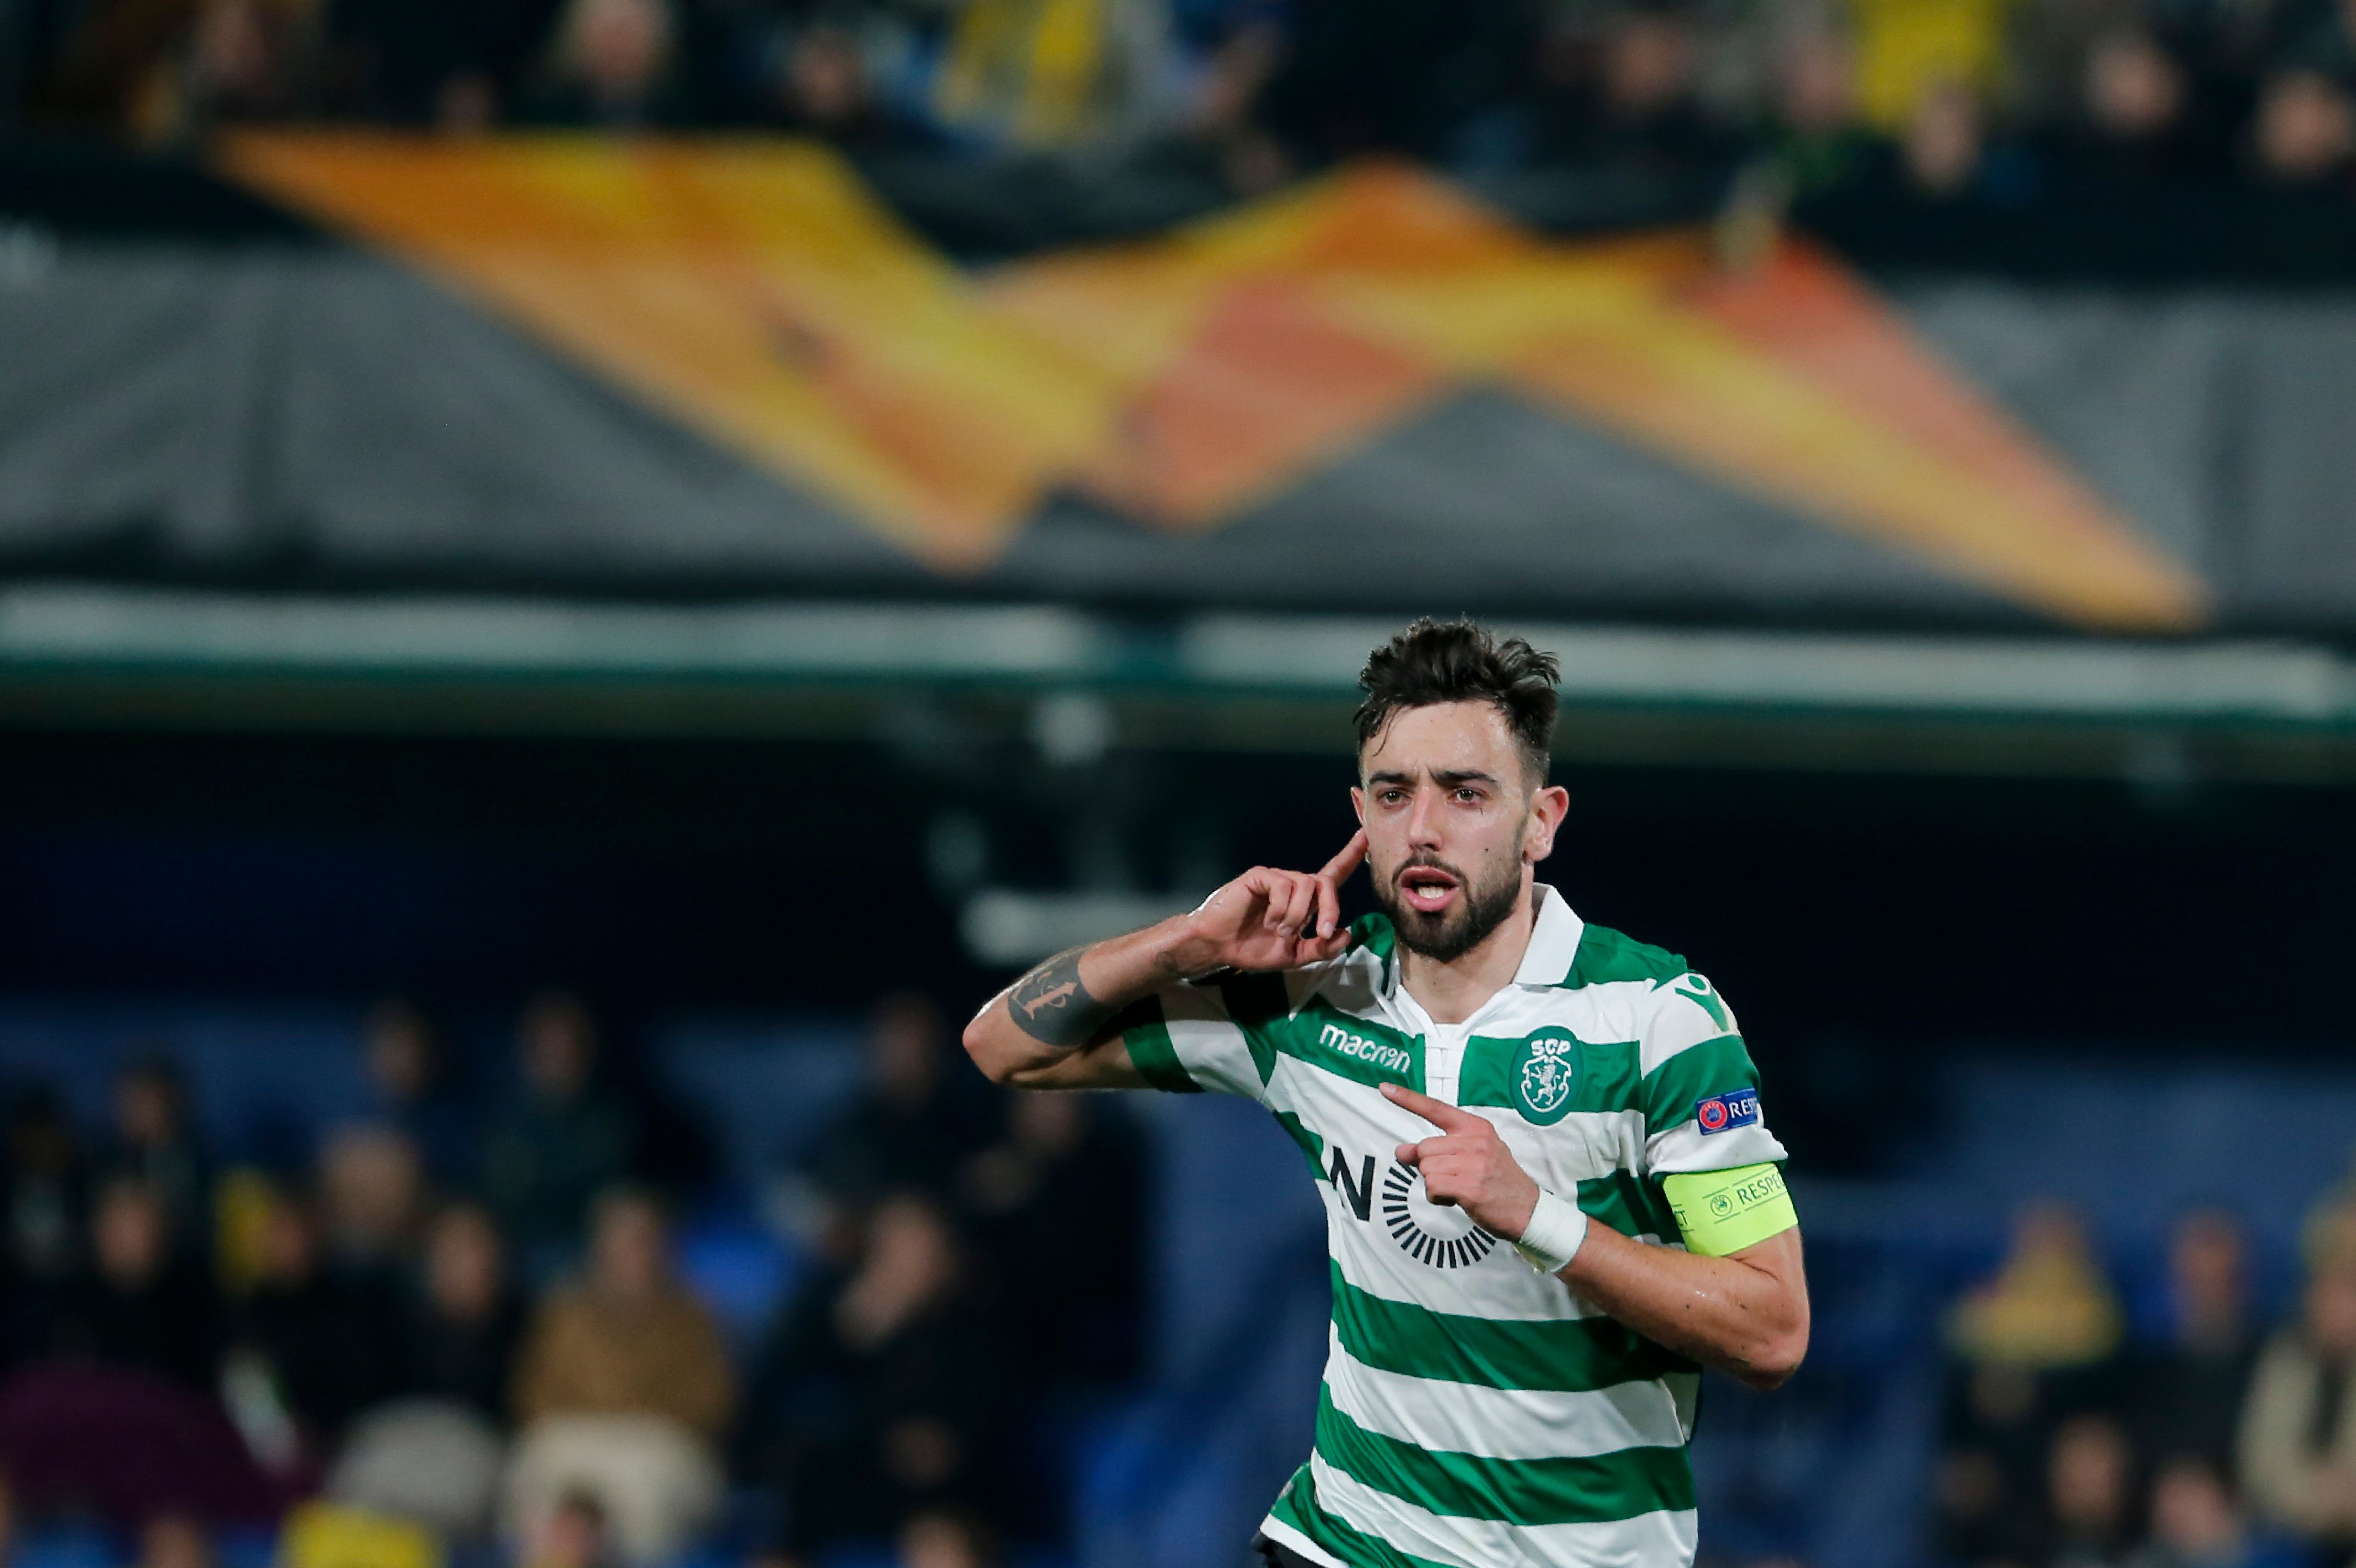 Sporting's Portuguese midfielder Bruno Fernandes celebrates after scoring during the UEFA Europa League round of 32 second leg football match between Villarreal CF and Sporting CP at the Ceramica stadium in Villarreal on February 21, 2019. (Photo by PAU BARRENA / AFP)        (Photo credit should read PAU BARRENA/AFP/Getty Images)